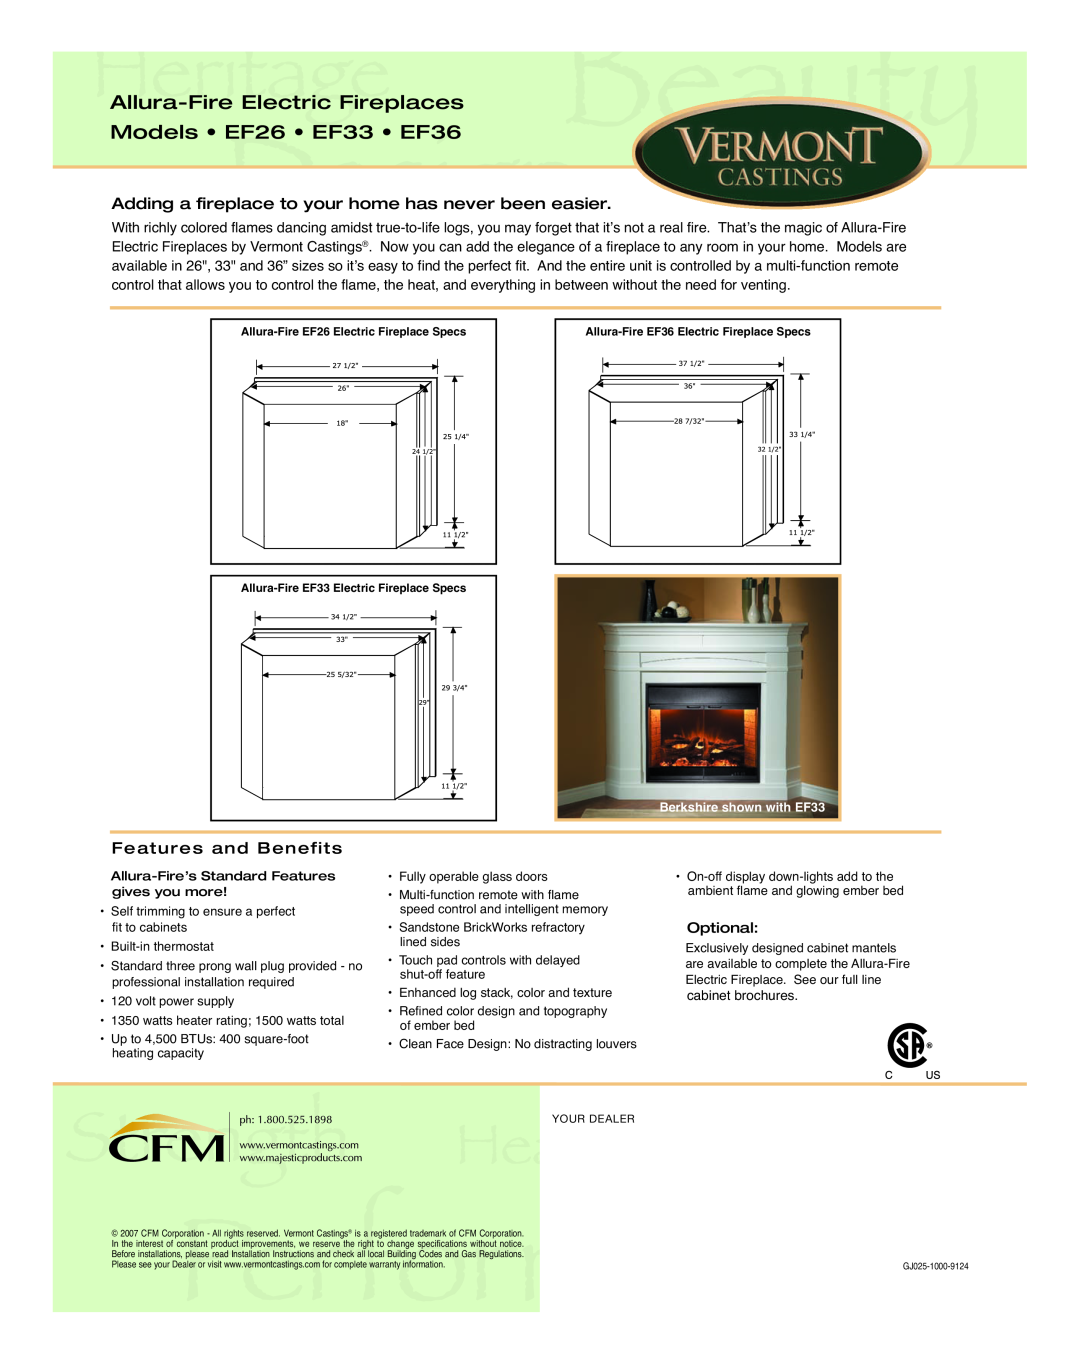 Vermont Casting manual Allura-FireElectric Fireplaces, Models EF26 EF33 EF36, Fe atu res and Bene fit s 